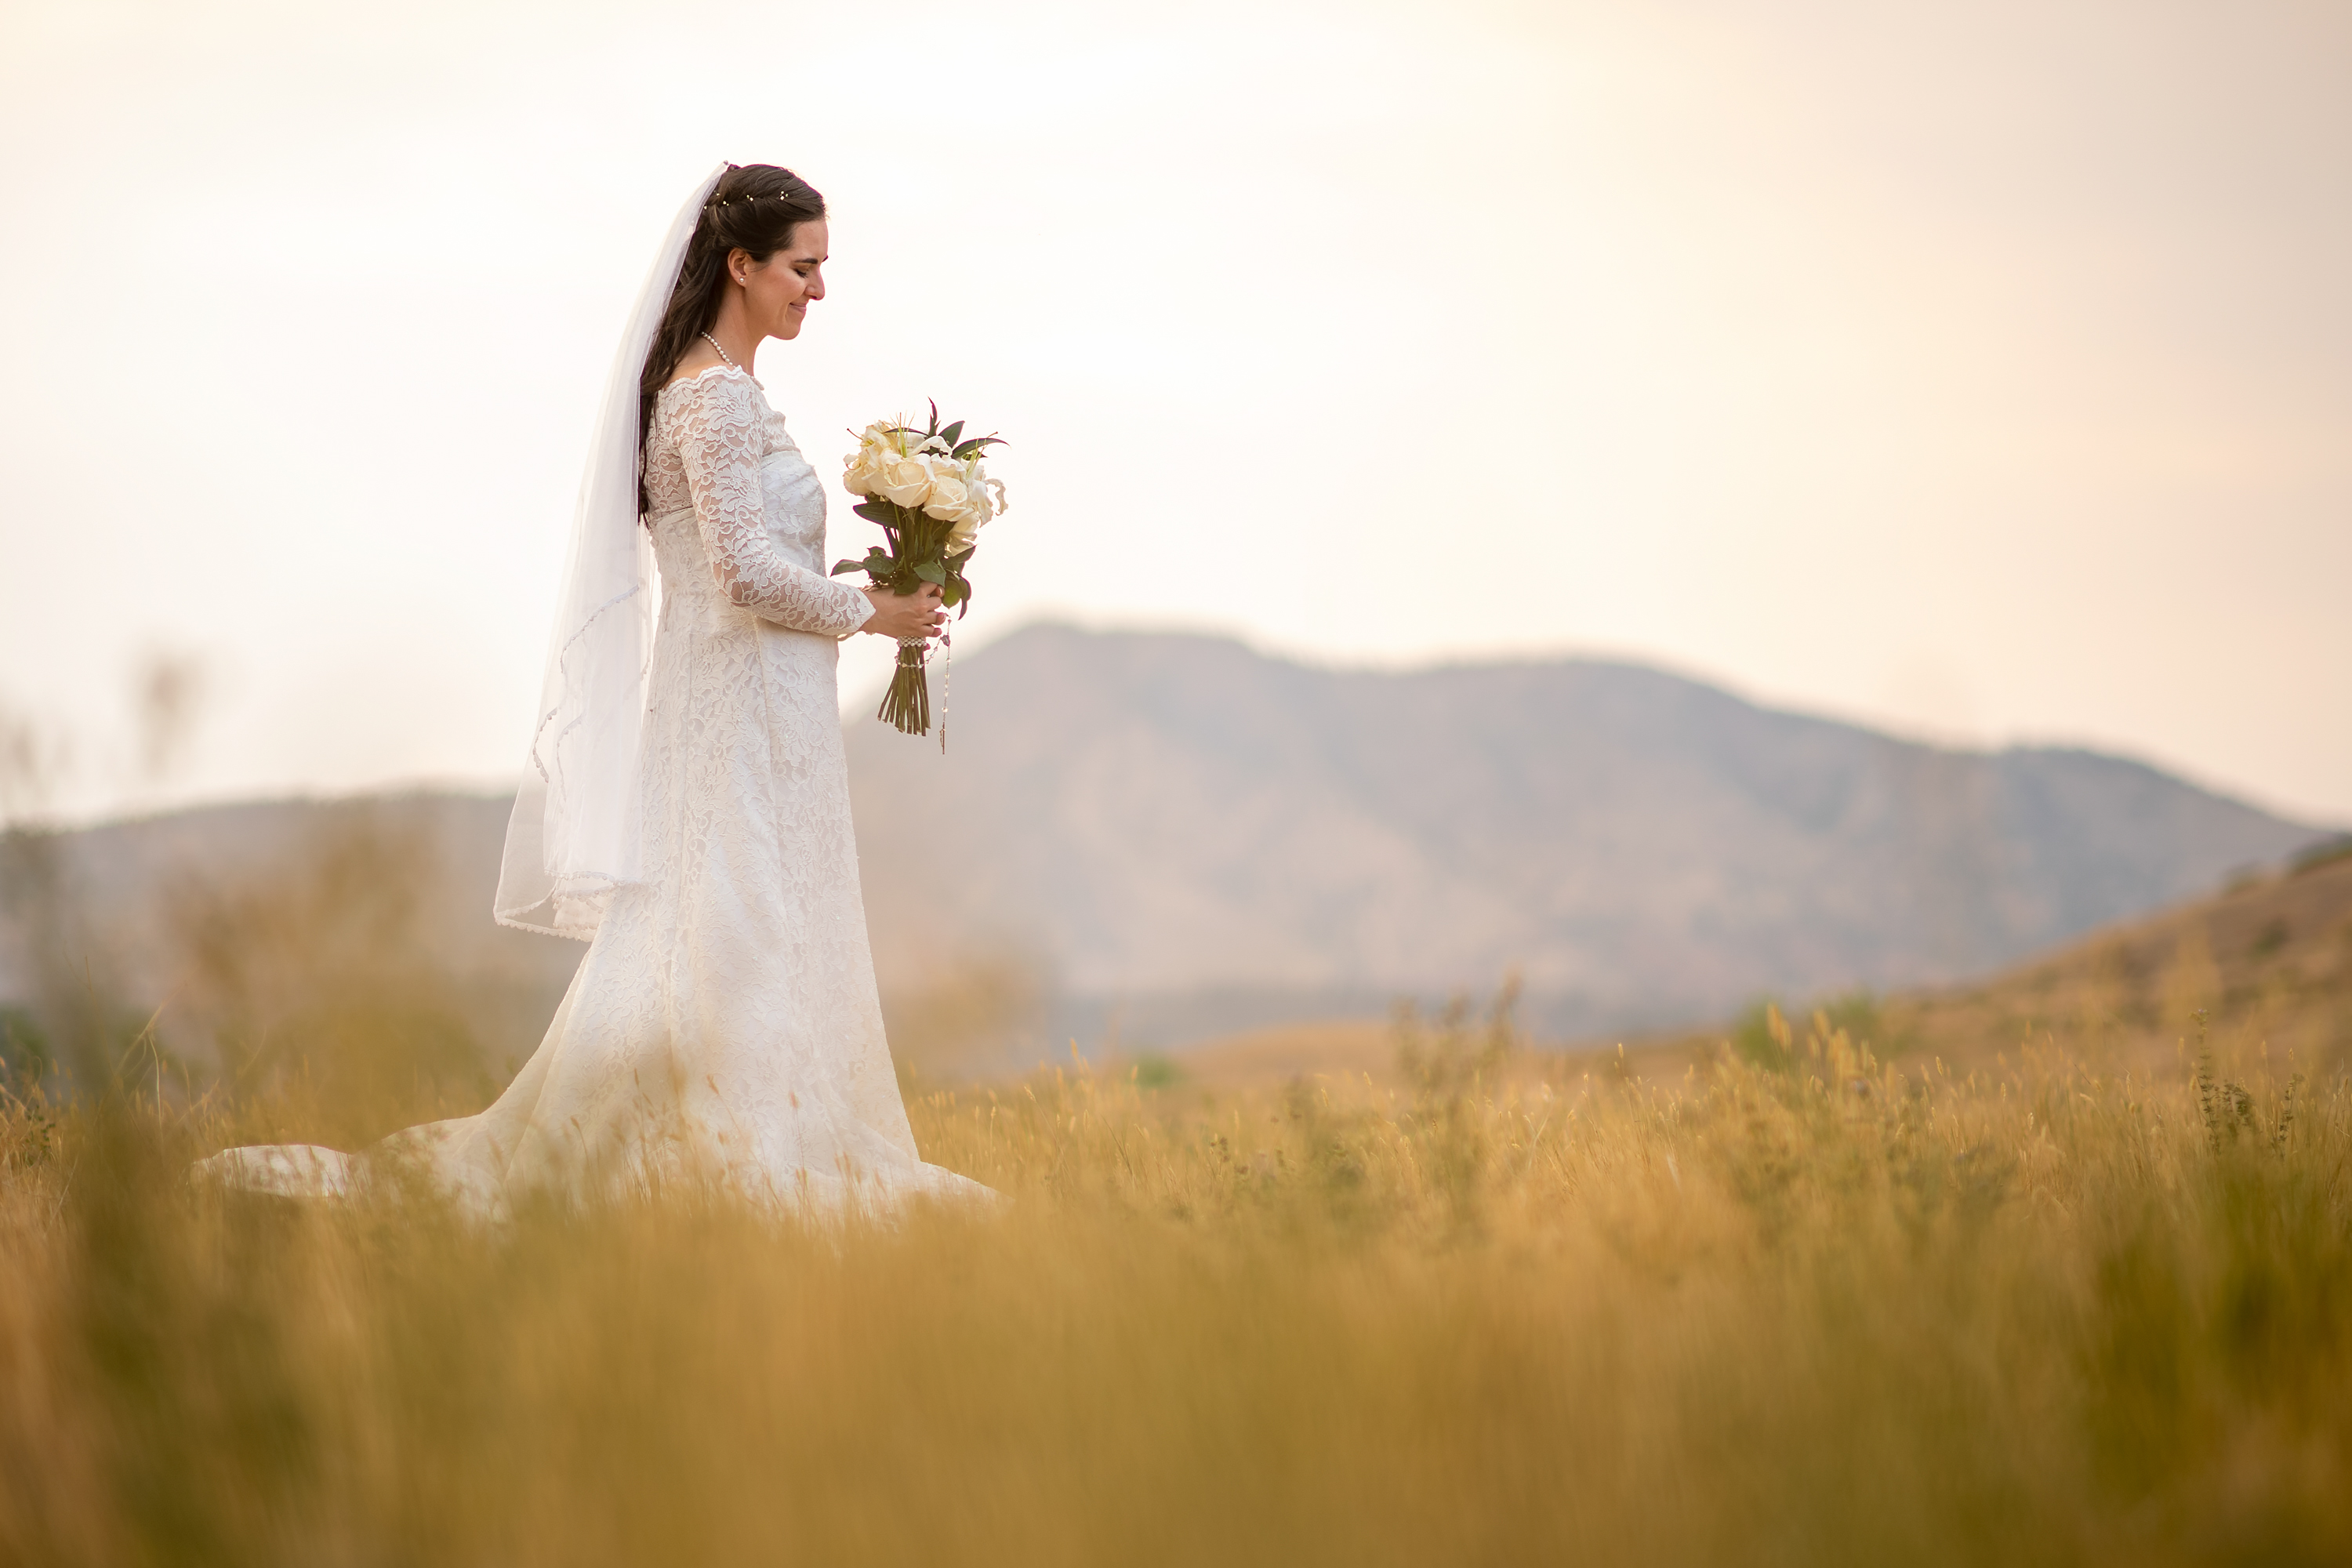 Bride poses during her wedding portrait session at Bear Creek Lake Park in Lakewood, Colorado.